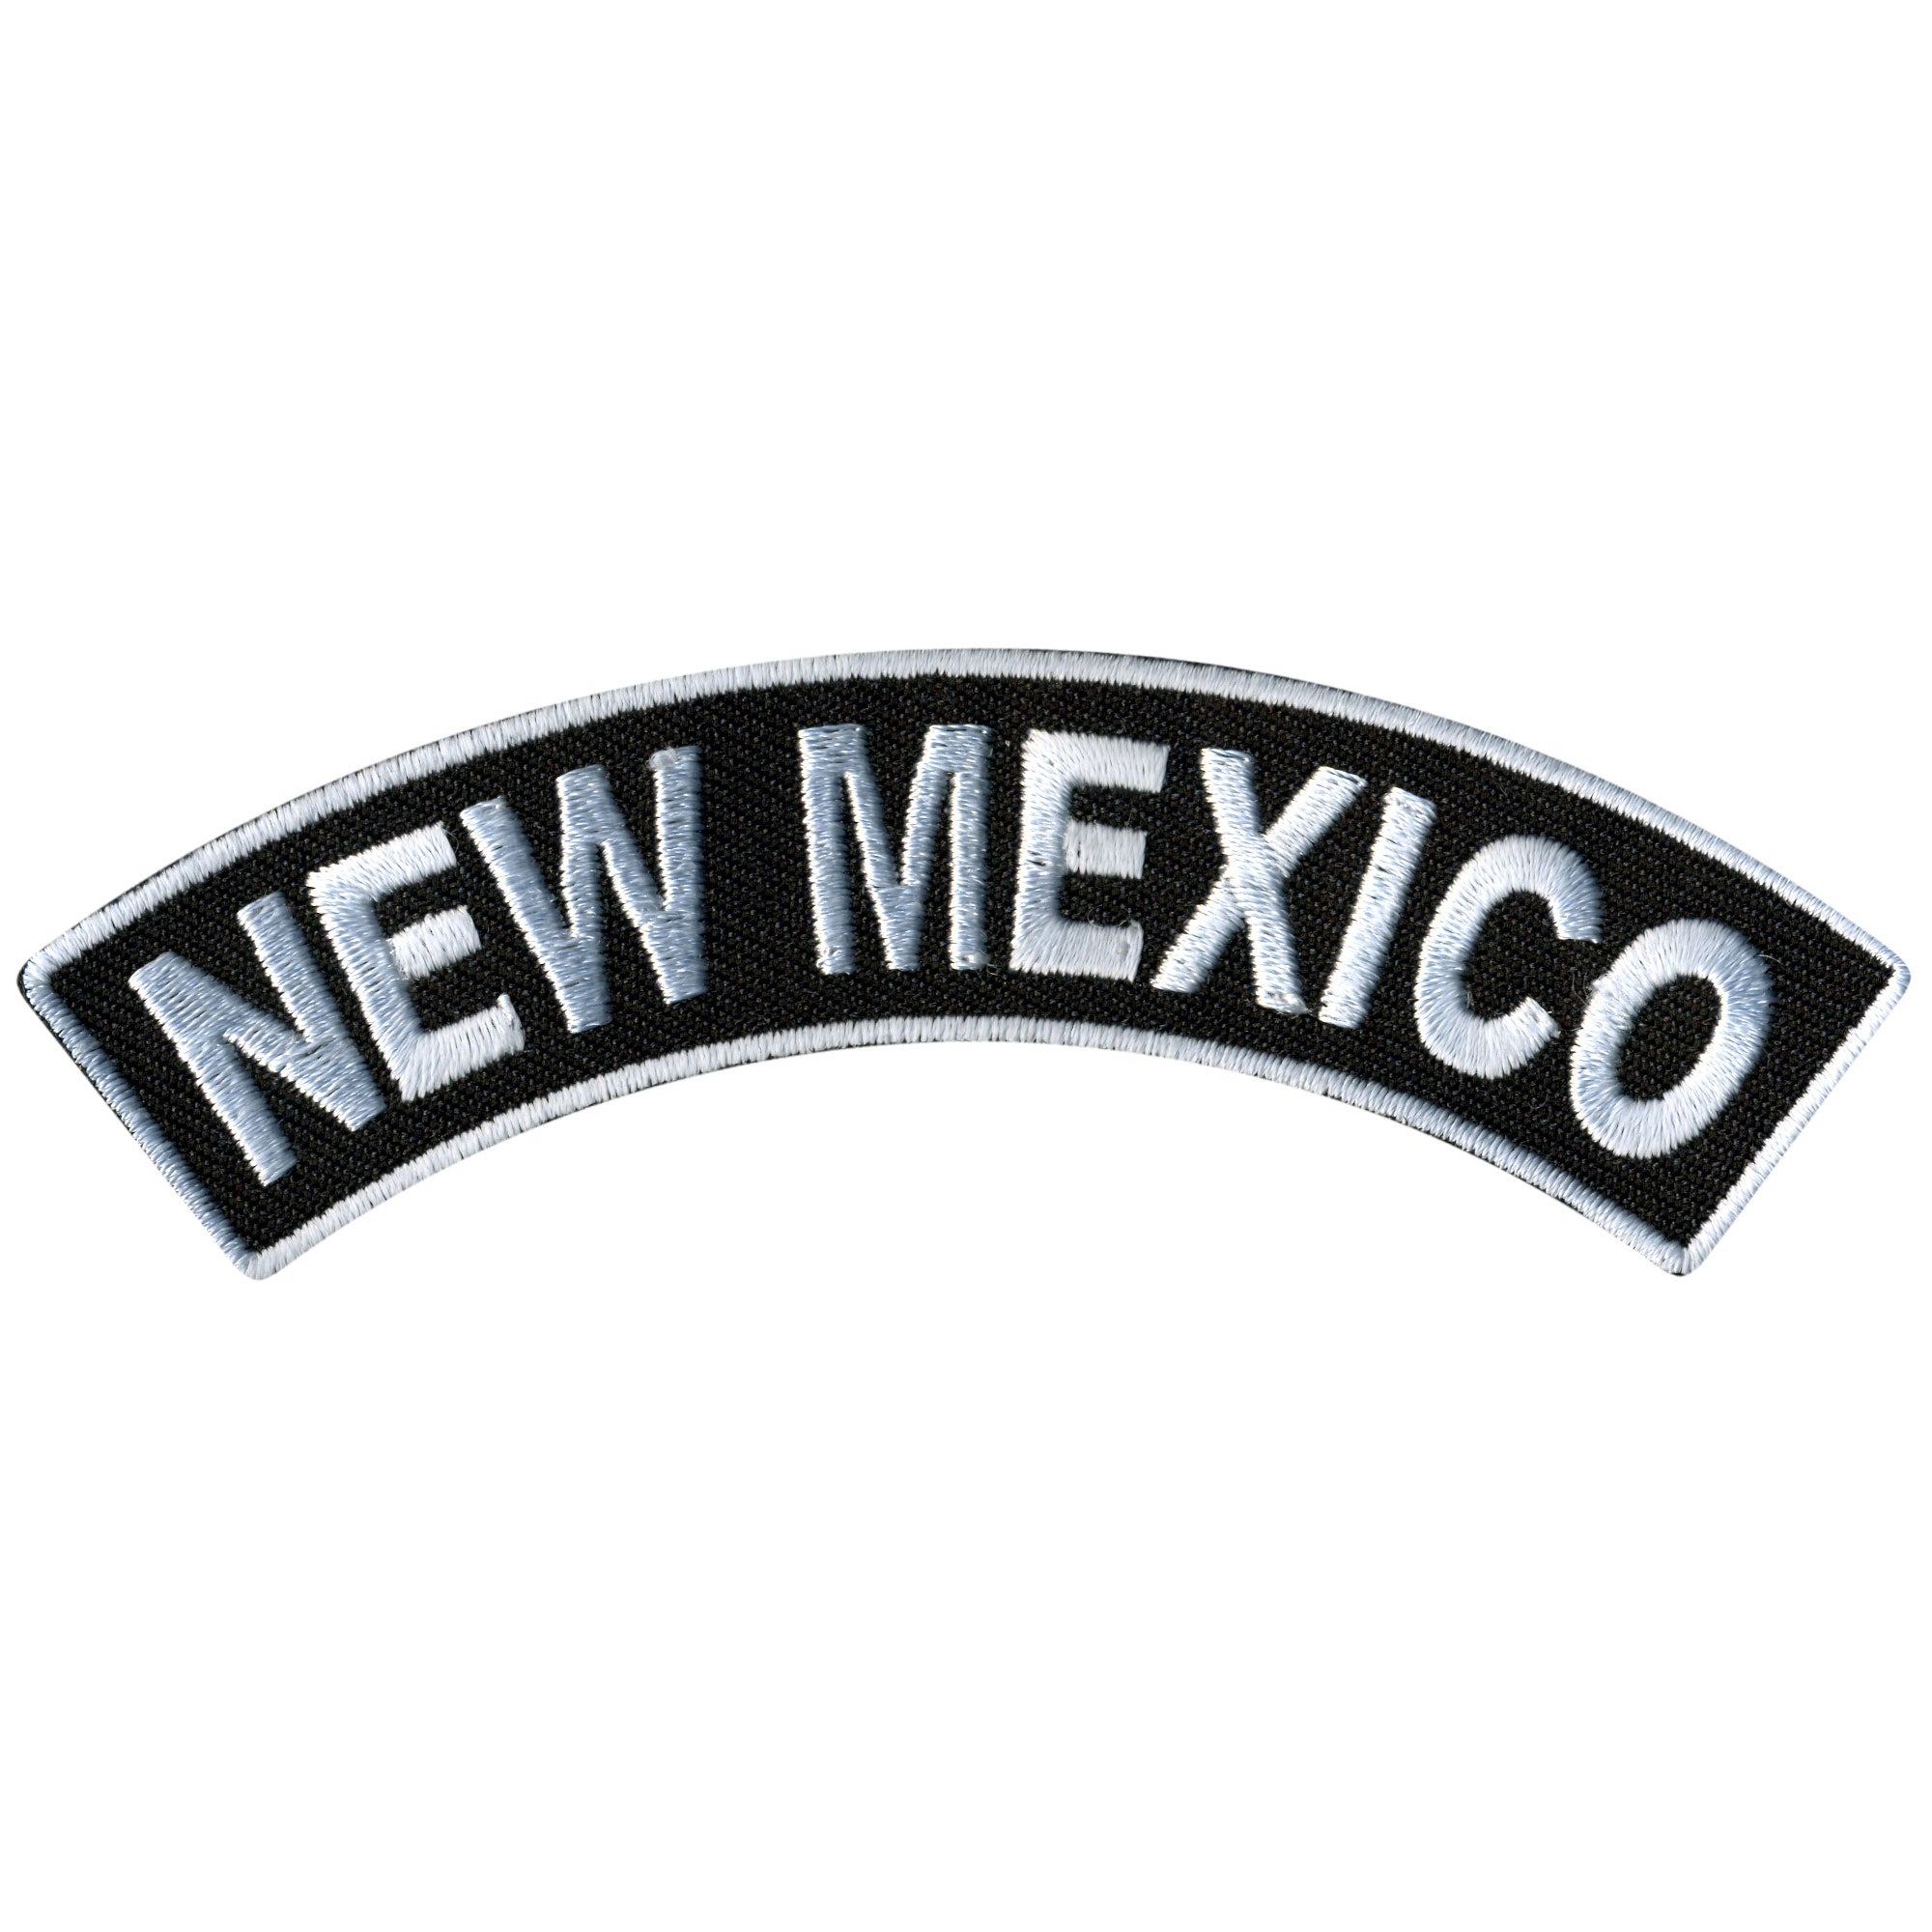 Hot Leathers New Mexico  4” X 1” Top Rocker Patch